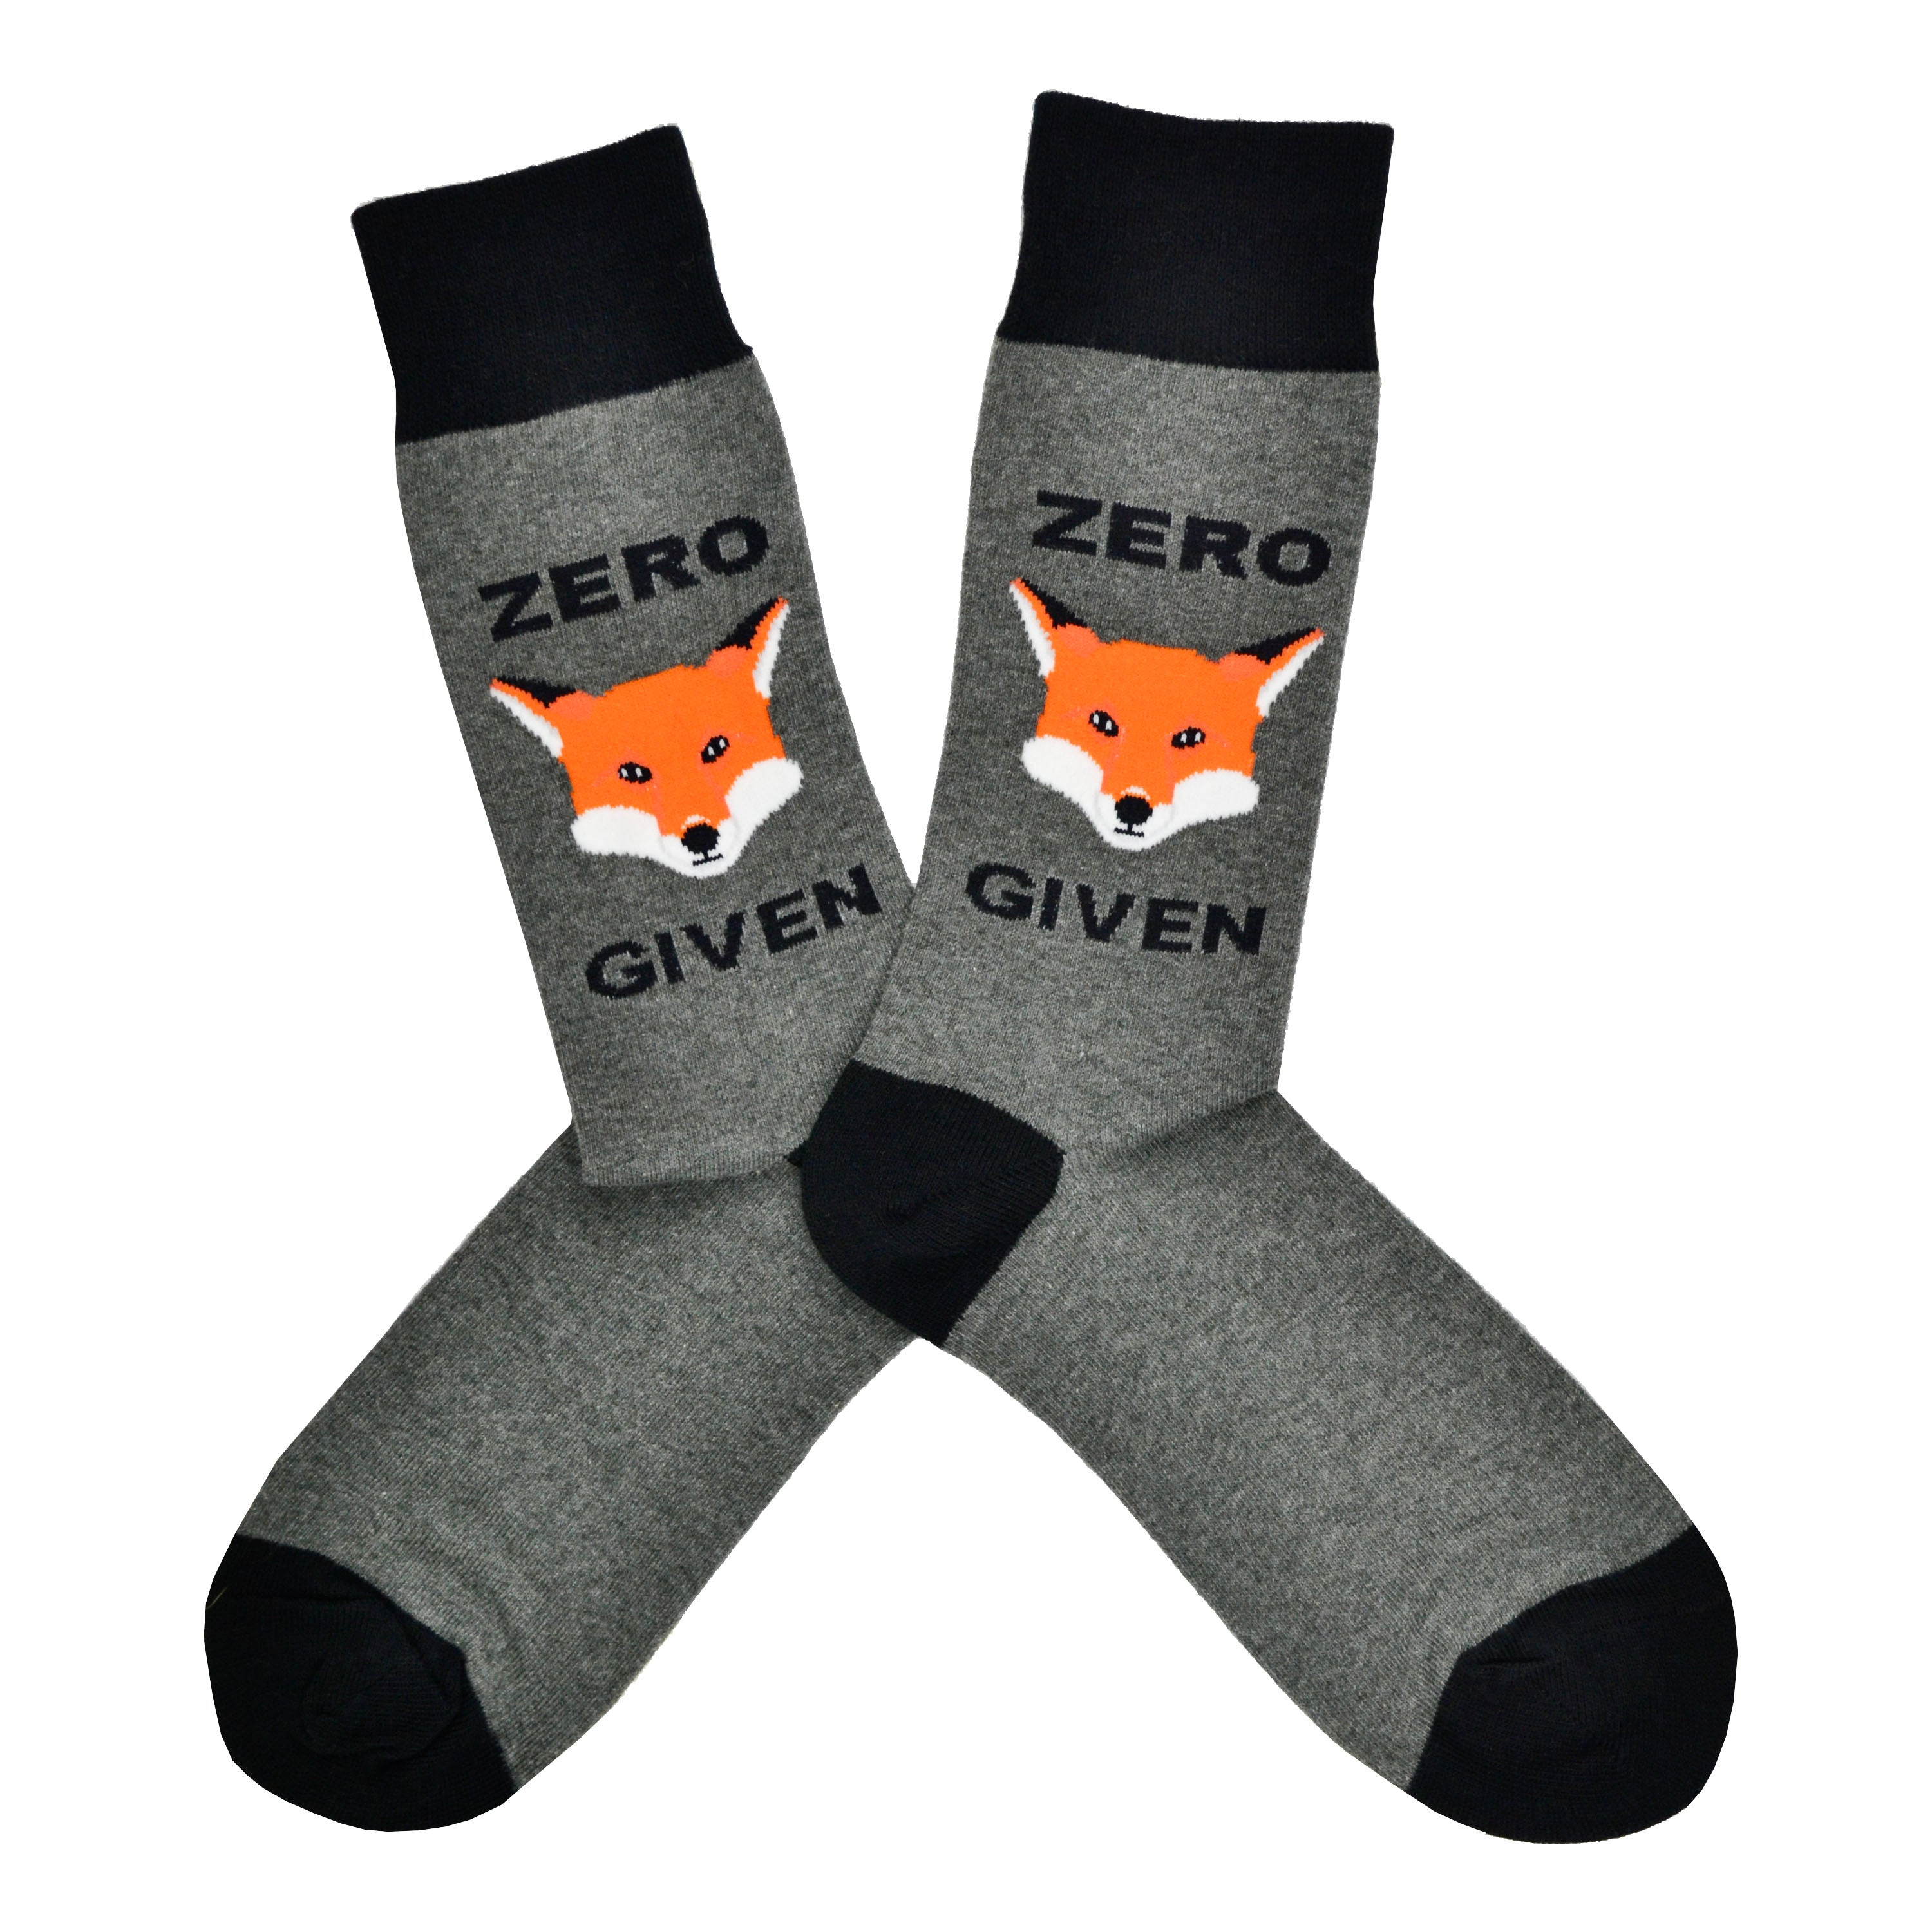 Shown in a flatlay, a pair of Socksmith brand men's cotton crew socks in grey with black heel/cuff/toe and a cartoon fox face on the leg. The text on the sock reads, 